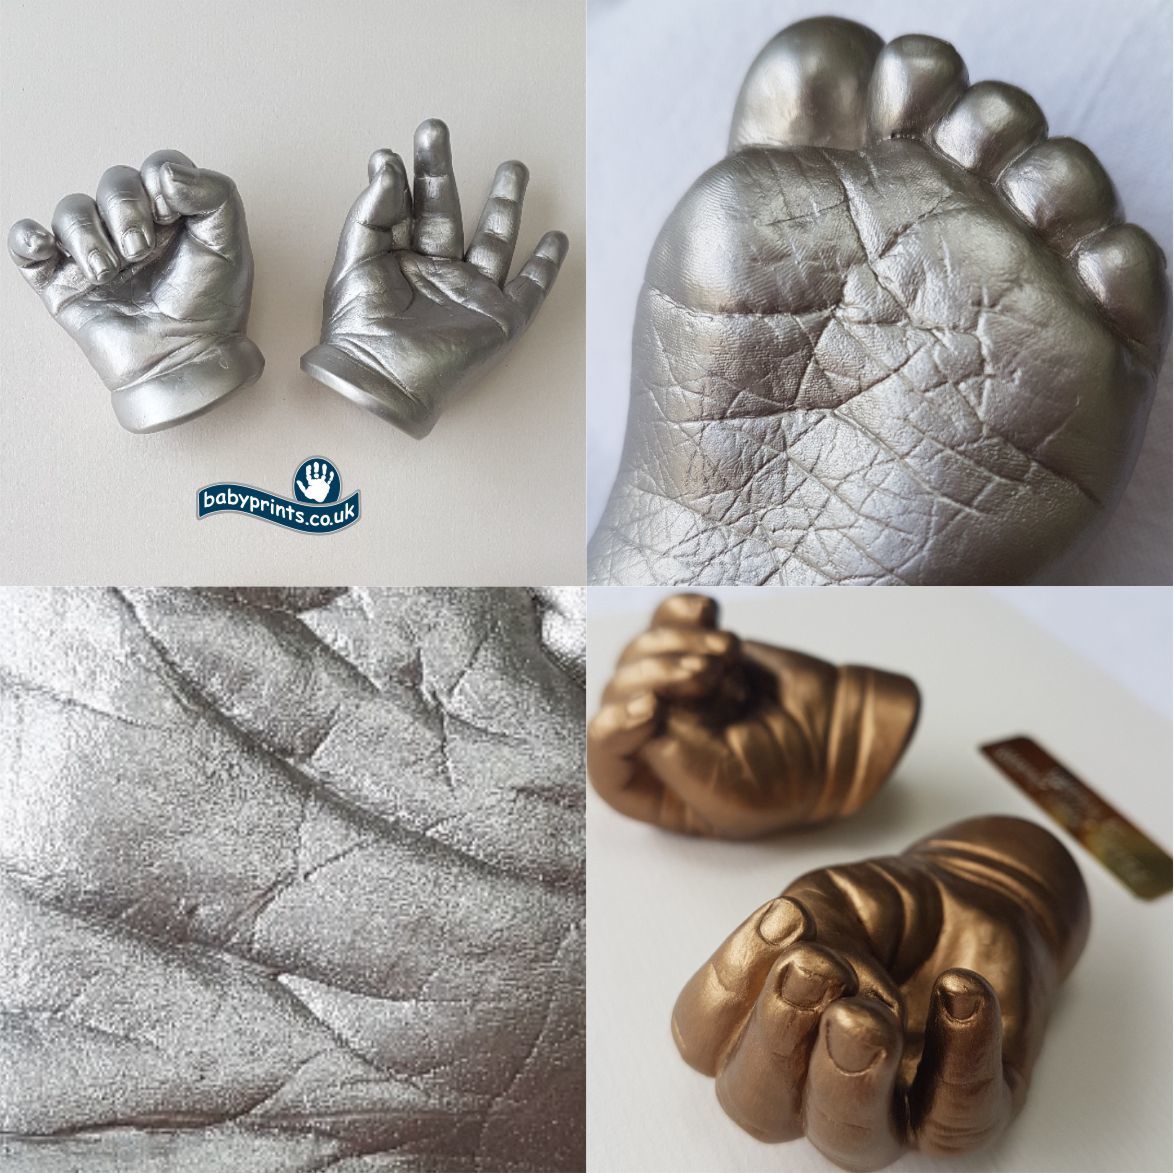 Where can I get quality Baby hands and feet castings made